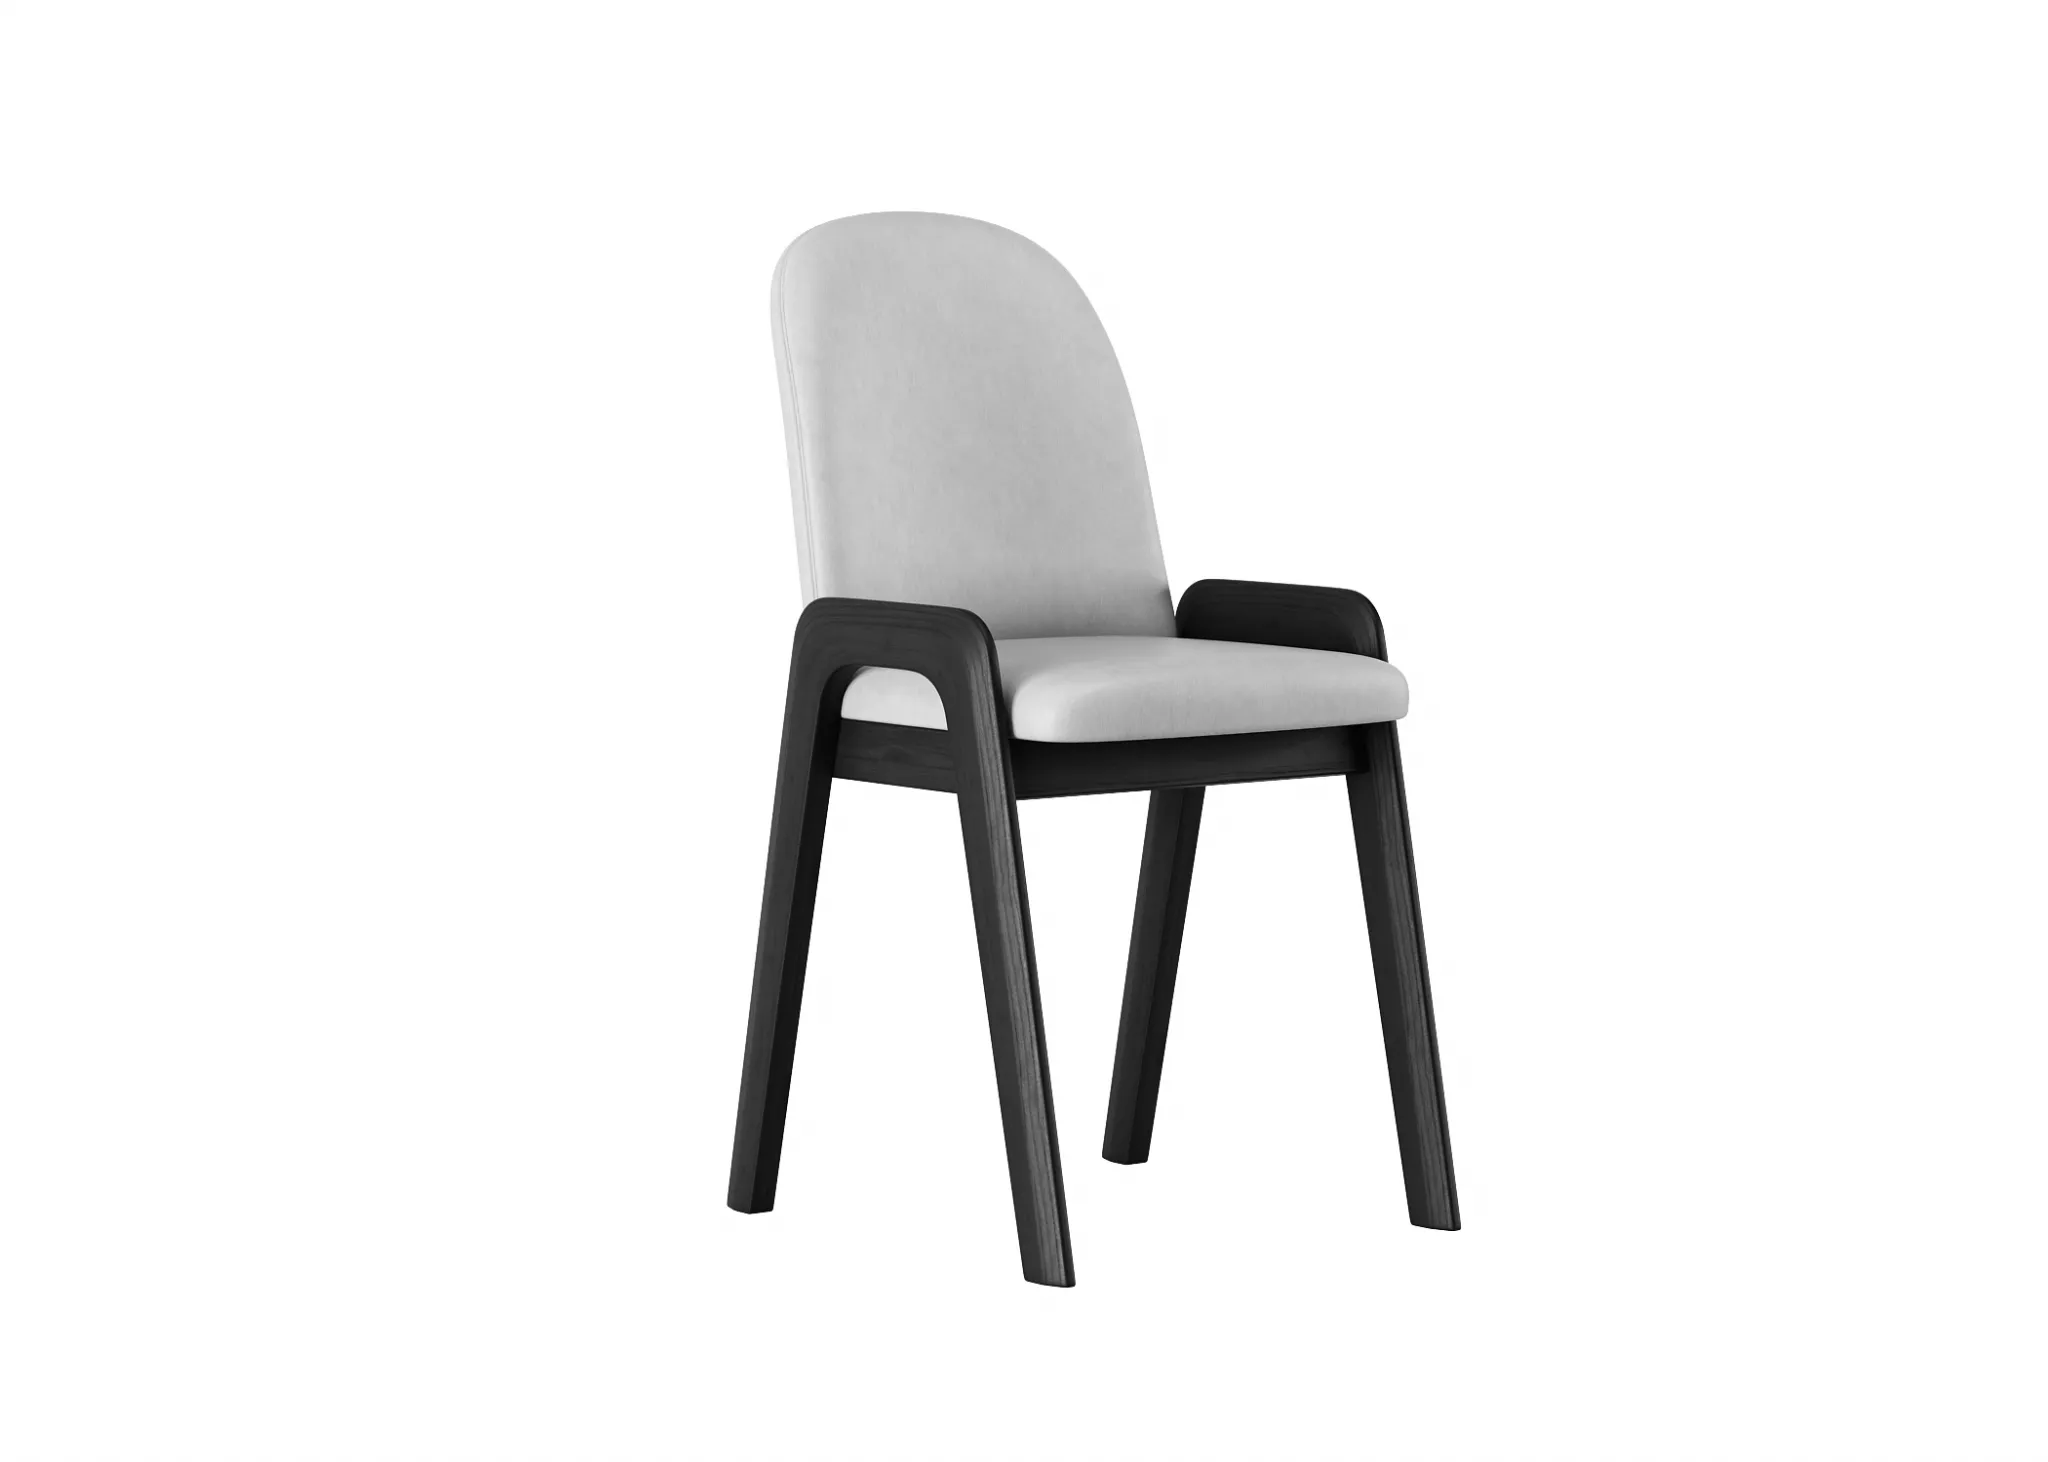 FURNITURE 3D MODELS – CHAIRS – 0308